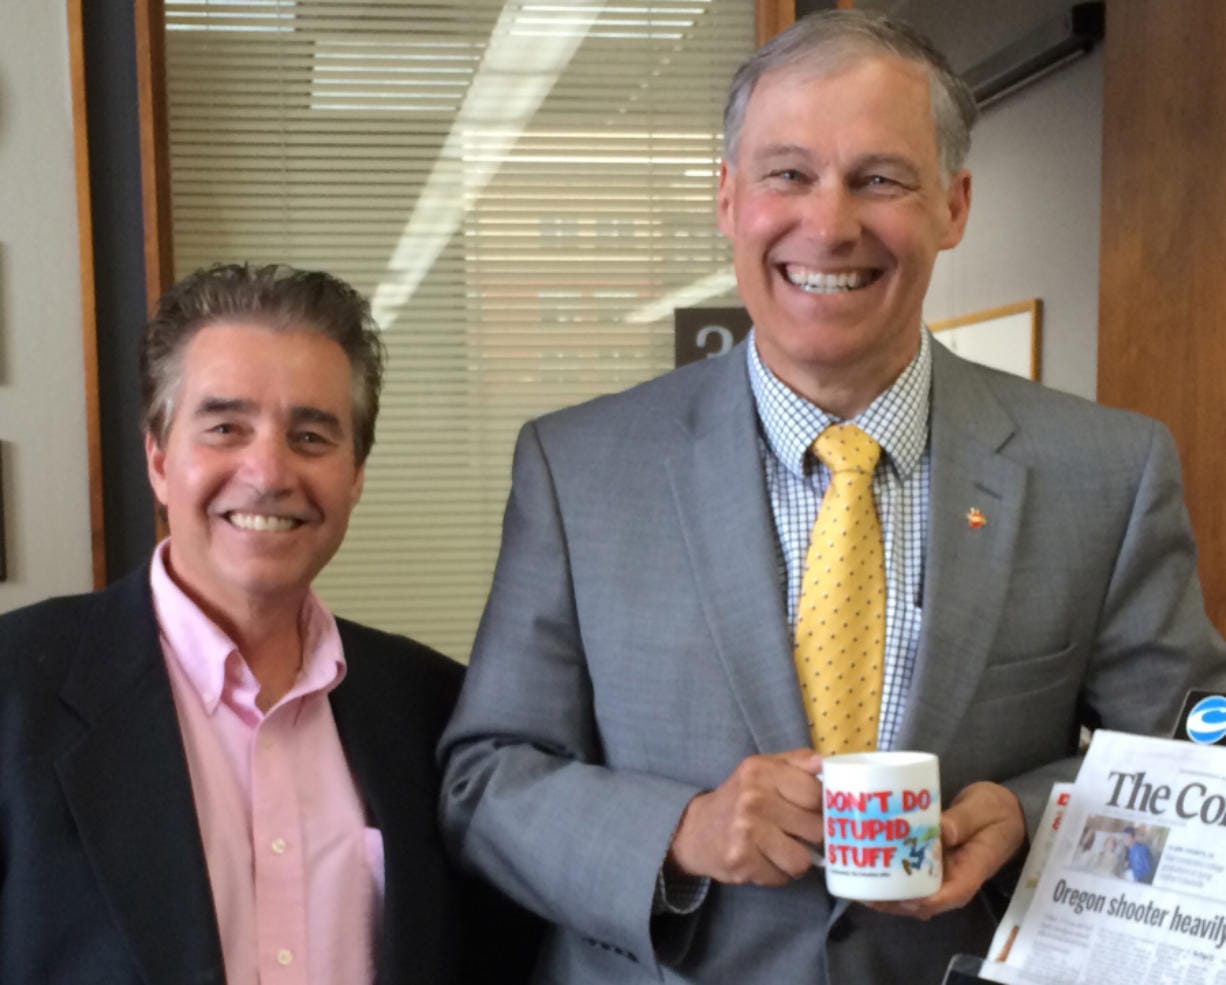 Many politicians purchased “Don’t Do Stupid Stuff” mugs, including Gov. Jay Inslee.